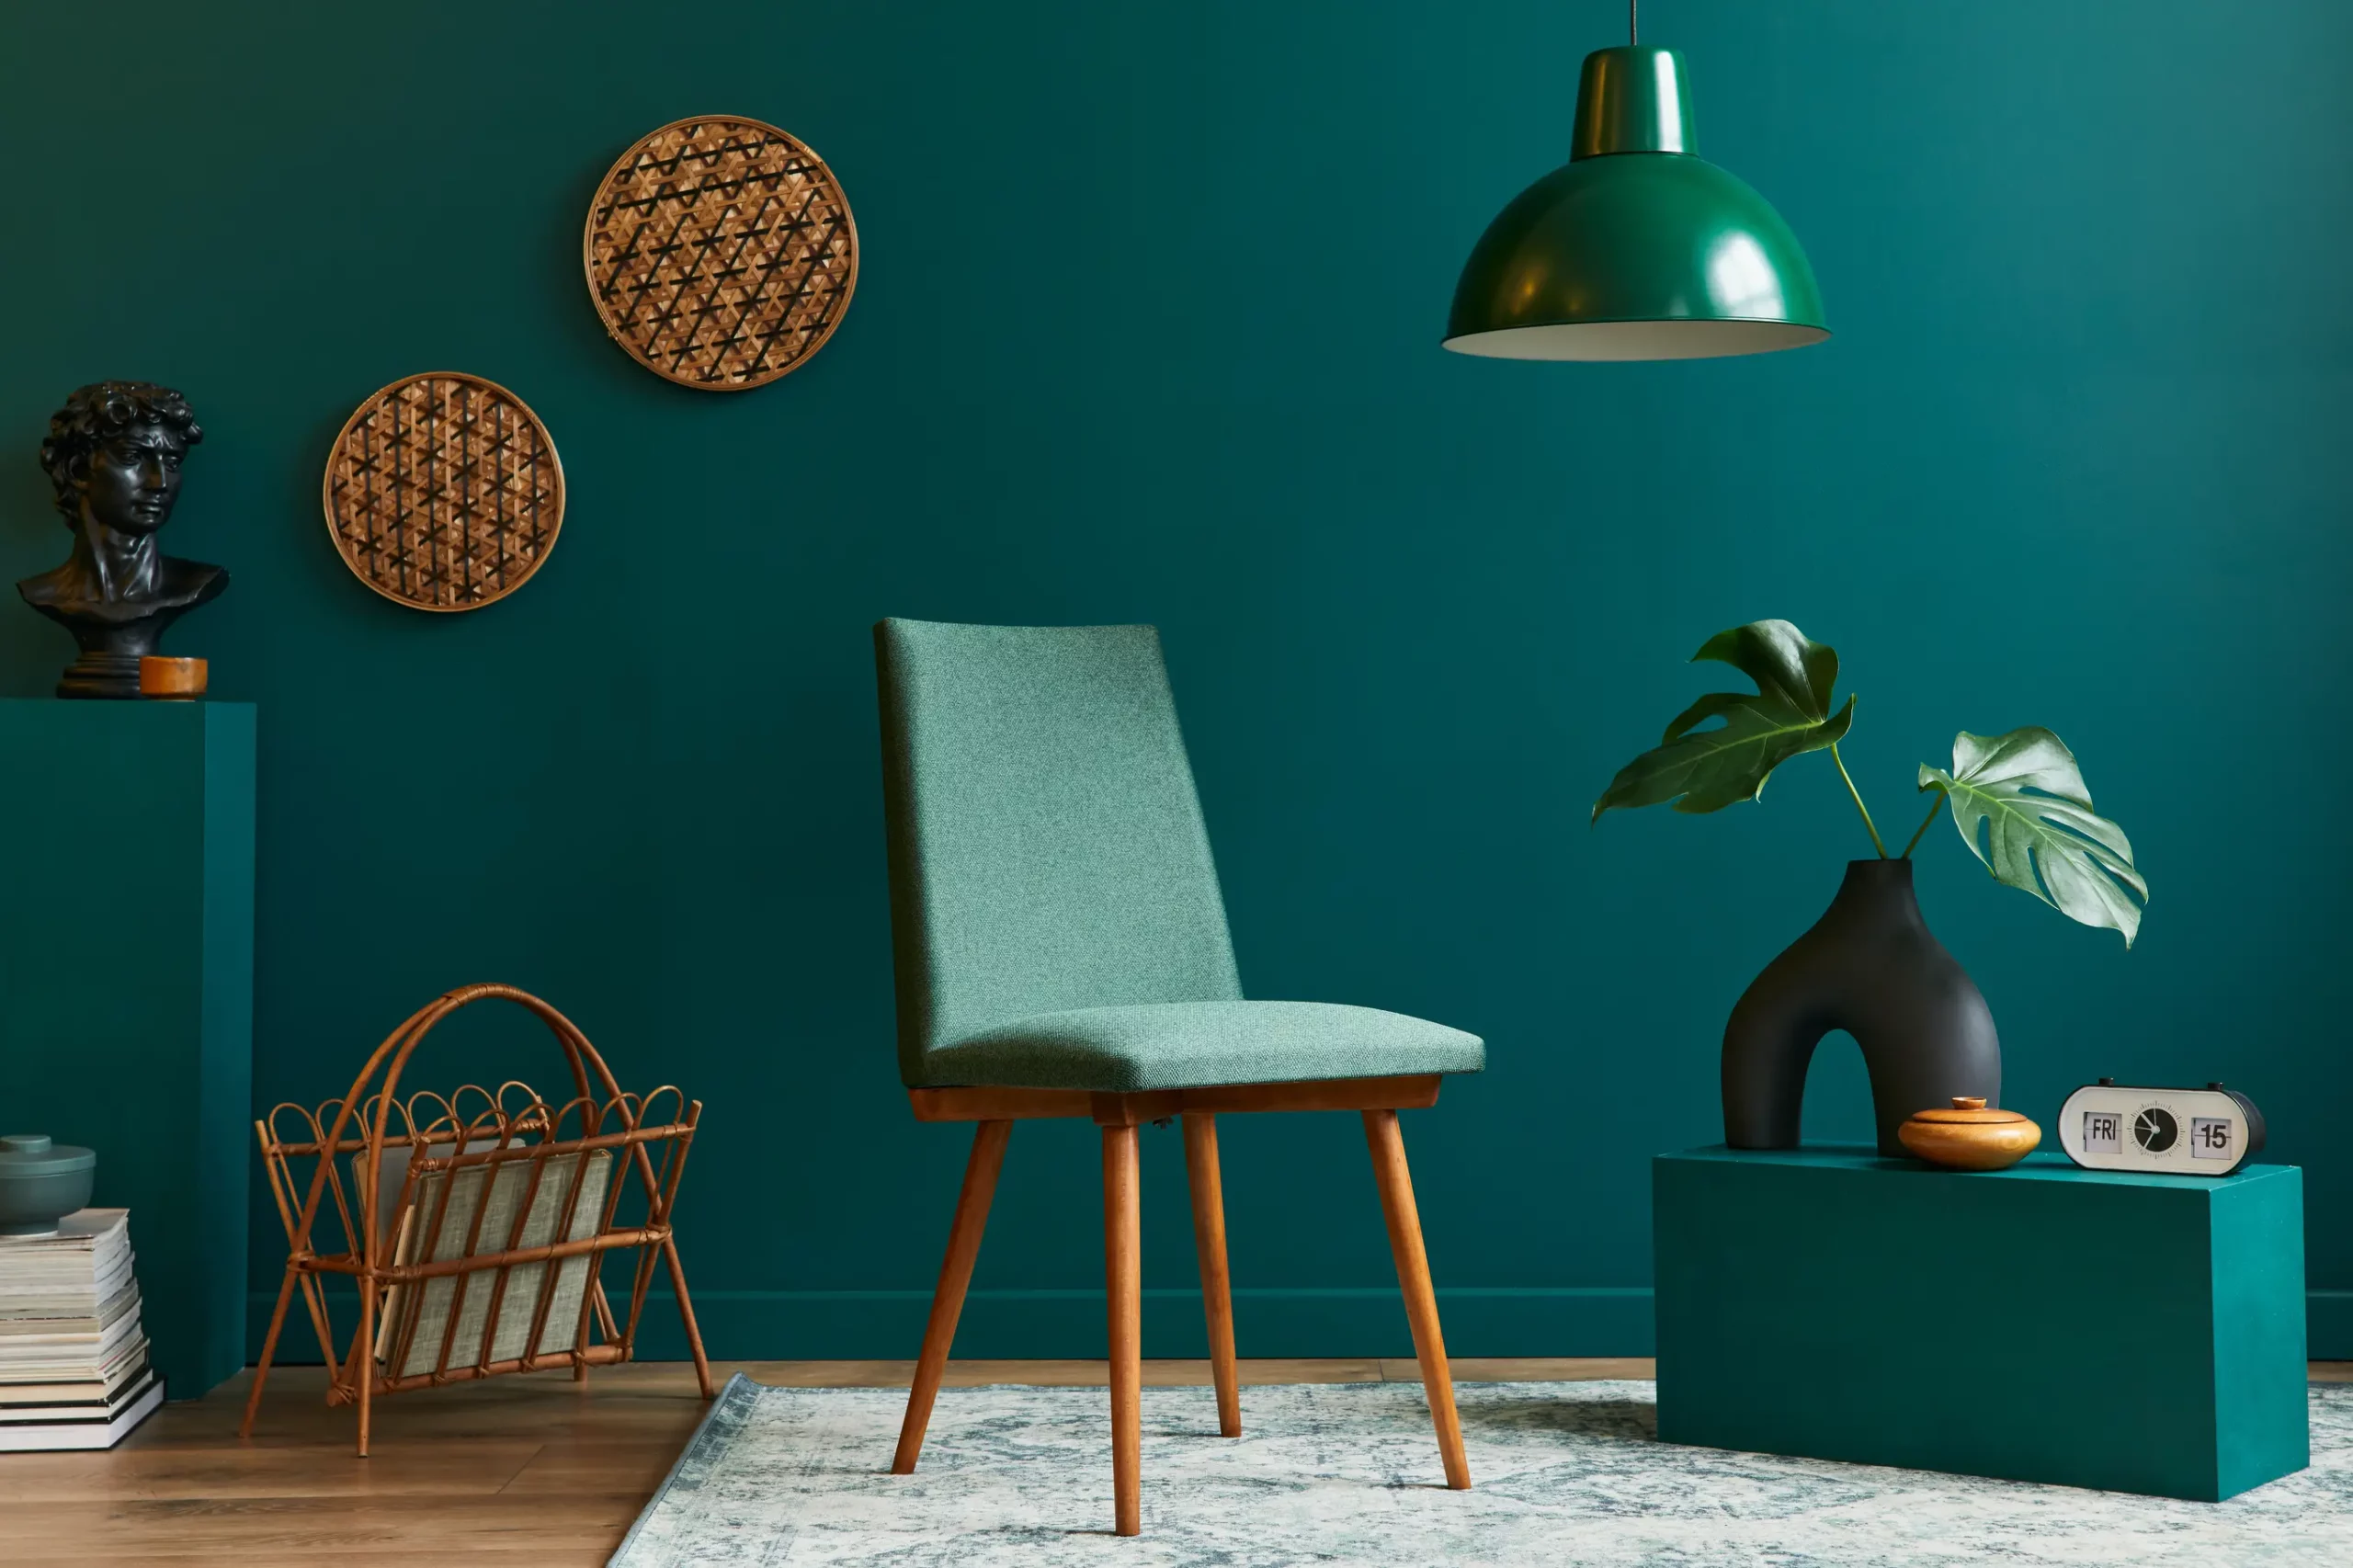 teal living room accessories with hanging pendant lamp, green midcentury style chair